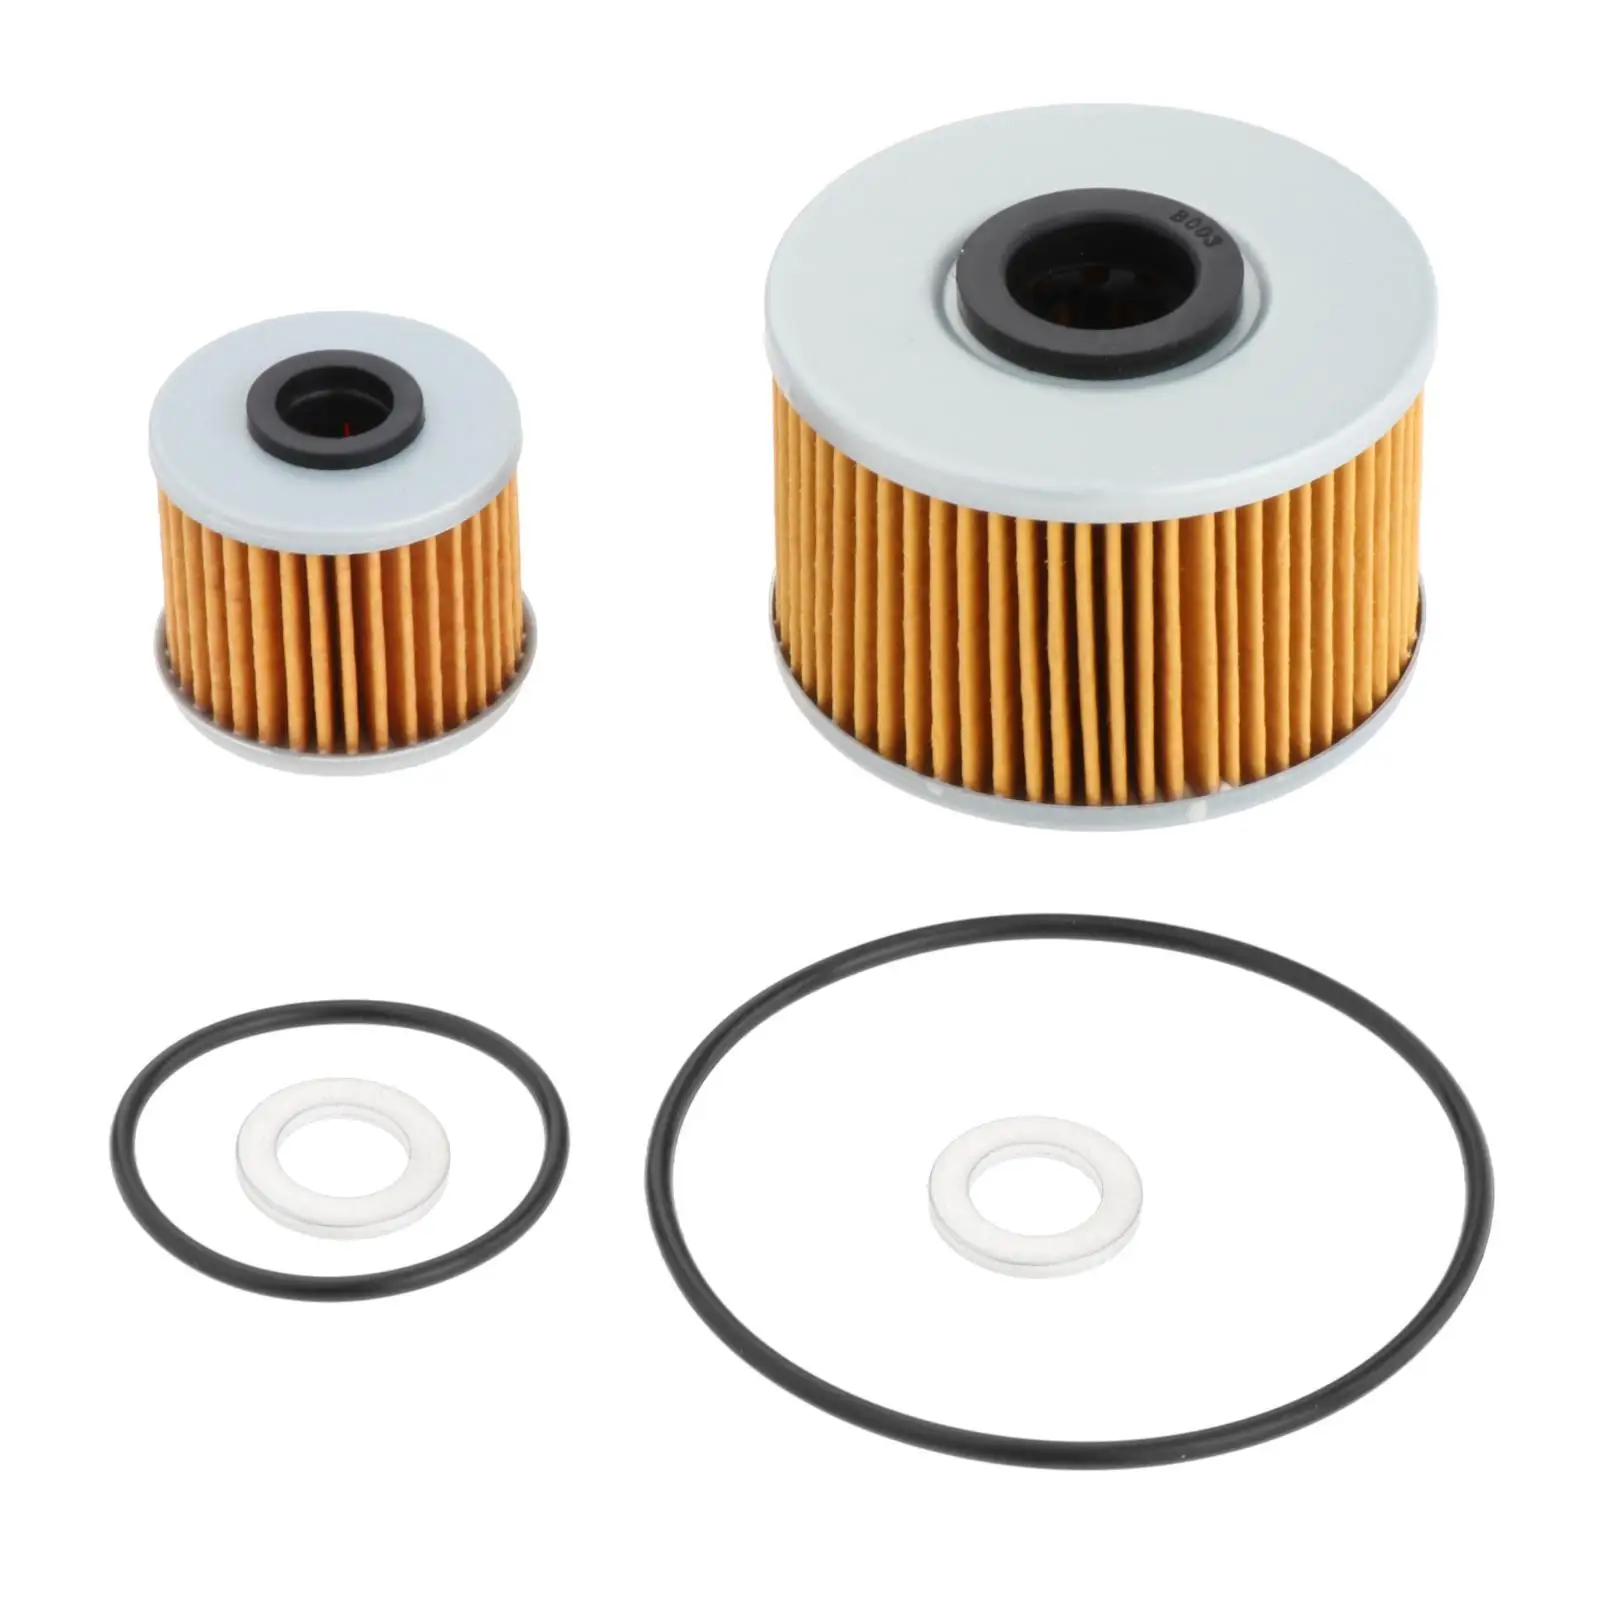 Oil Filter Replace Set 15412HP7A01 15412Mgsd21 Washers for Honda TRX420